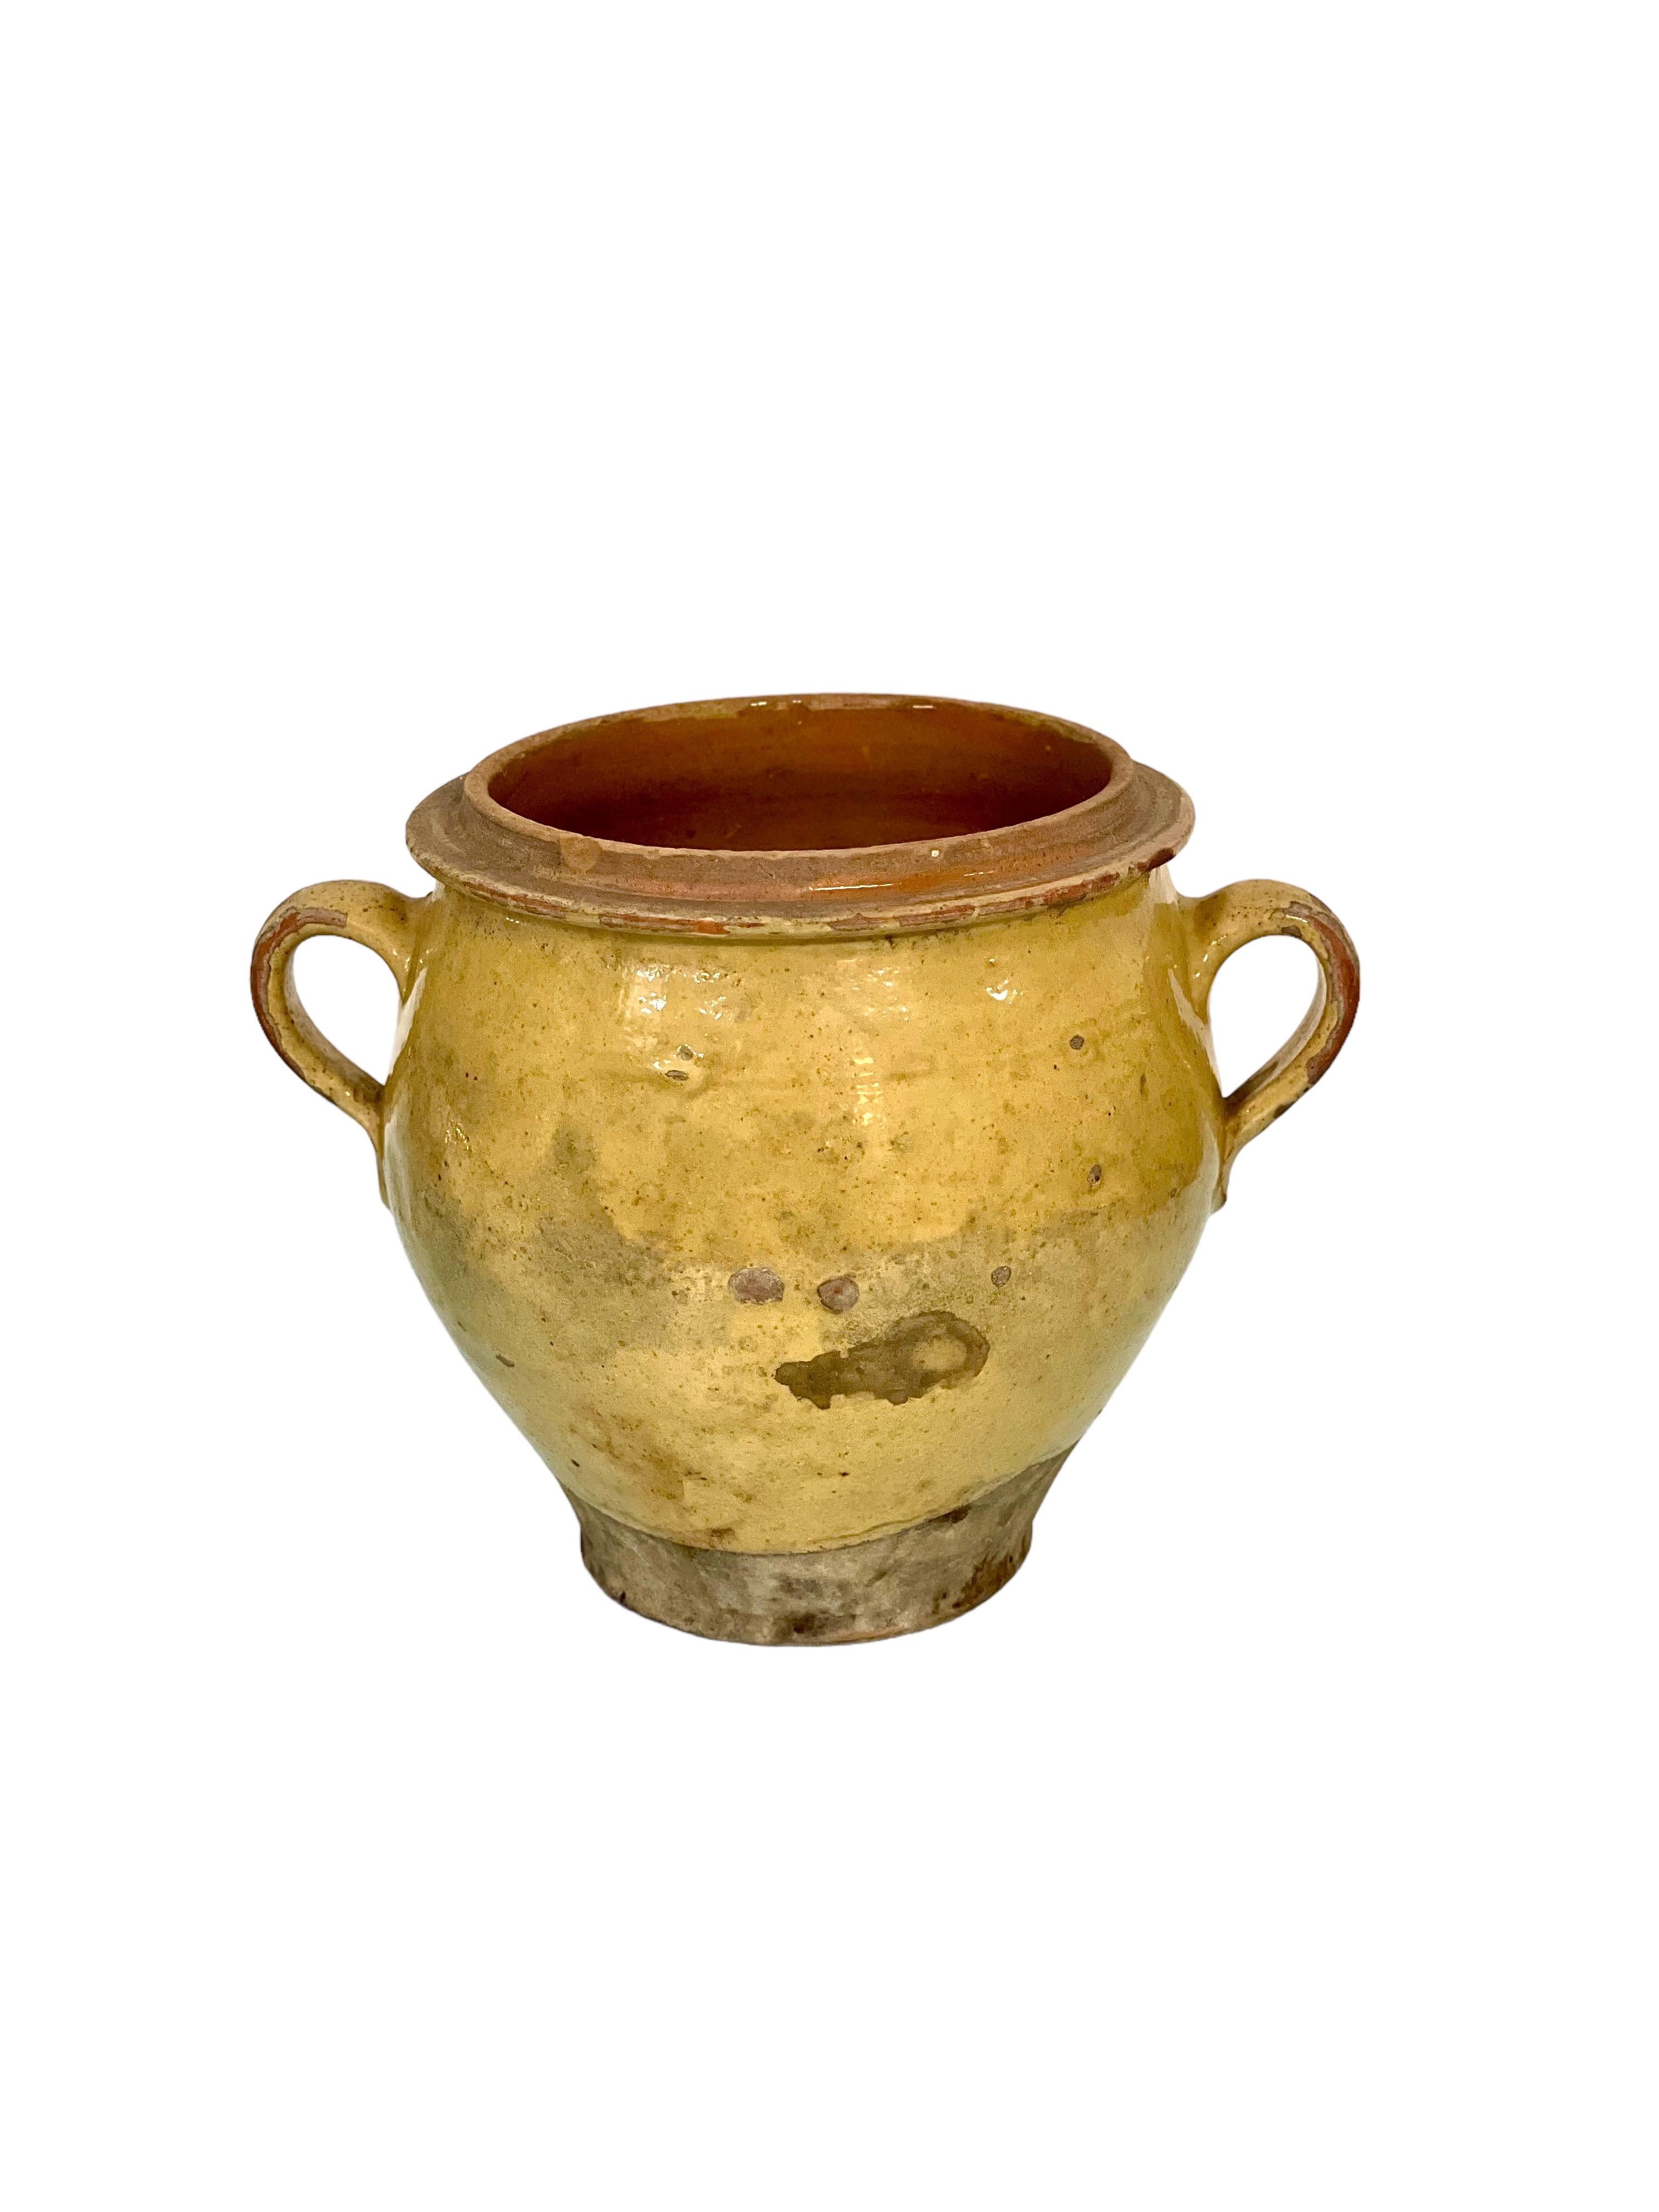 Traditional French terracotta confit pot with yellow glaze and two side handles. Dating from the 19th century, this vessel was used to conserve food – mainly meats in fat – before the invention of refrigeration.